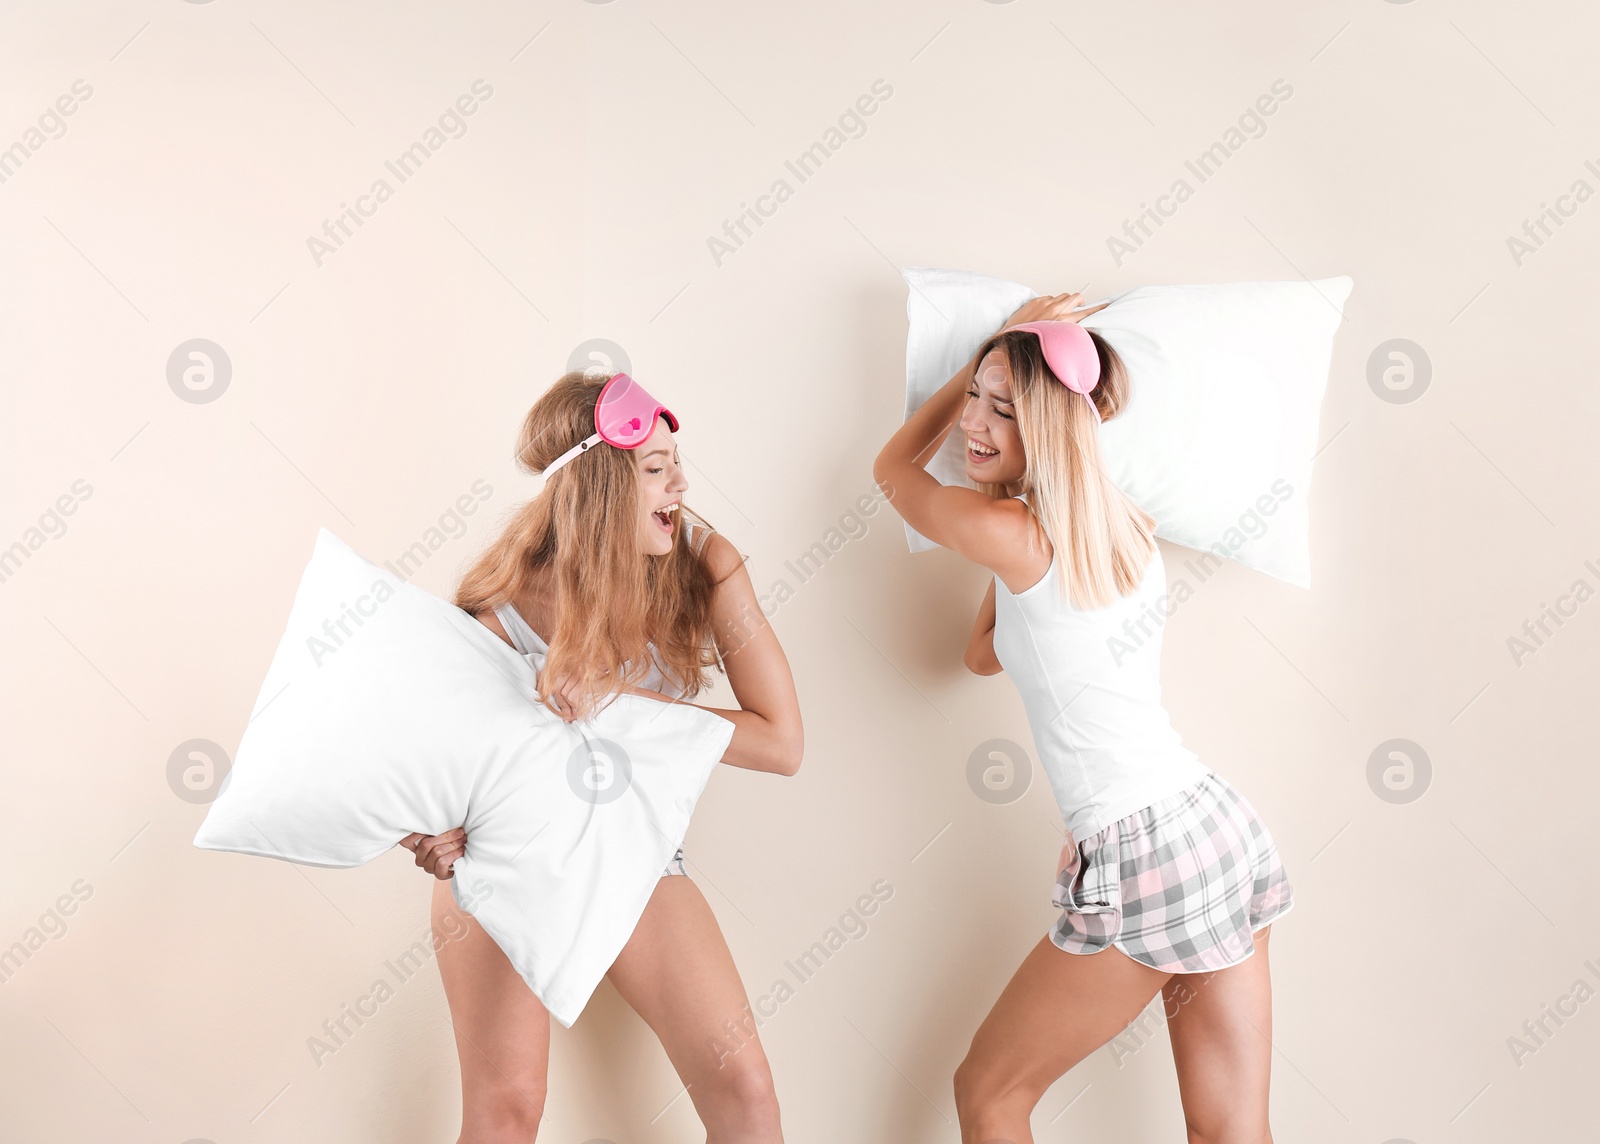 Photo of Two young women having pillow fight against color background